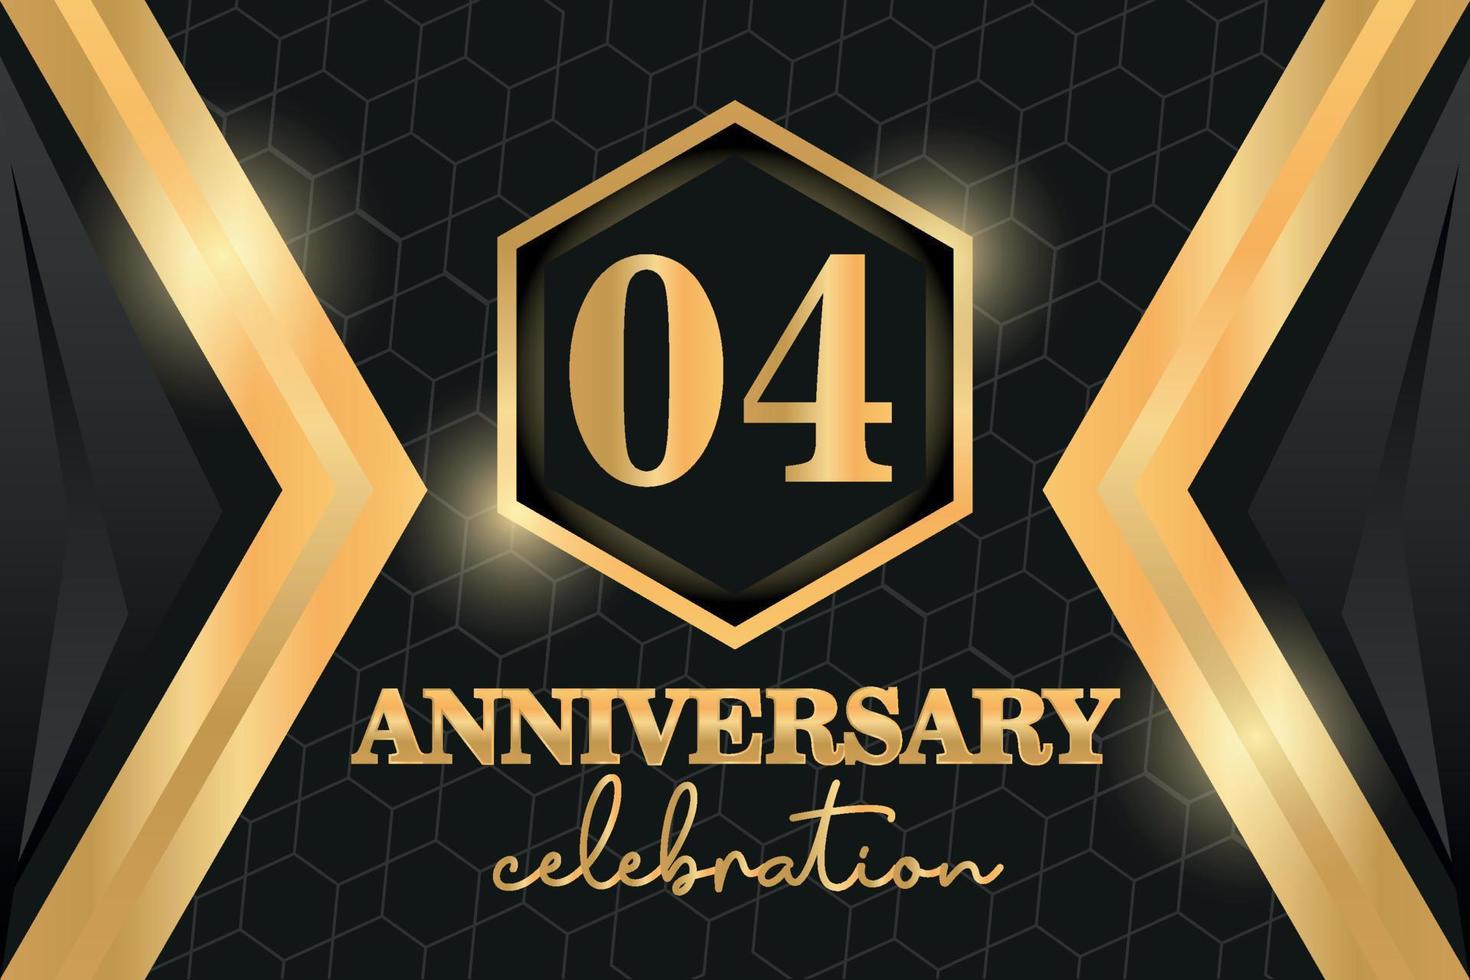 04 Years Anniversary Logo Golden Colored vector design  on black background template for greeting